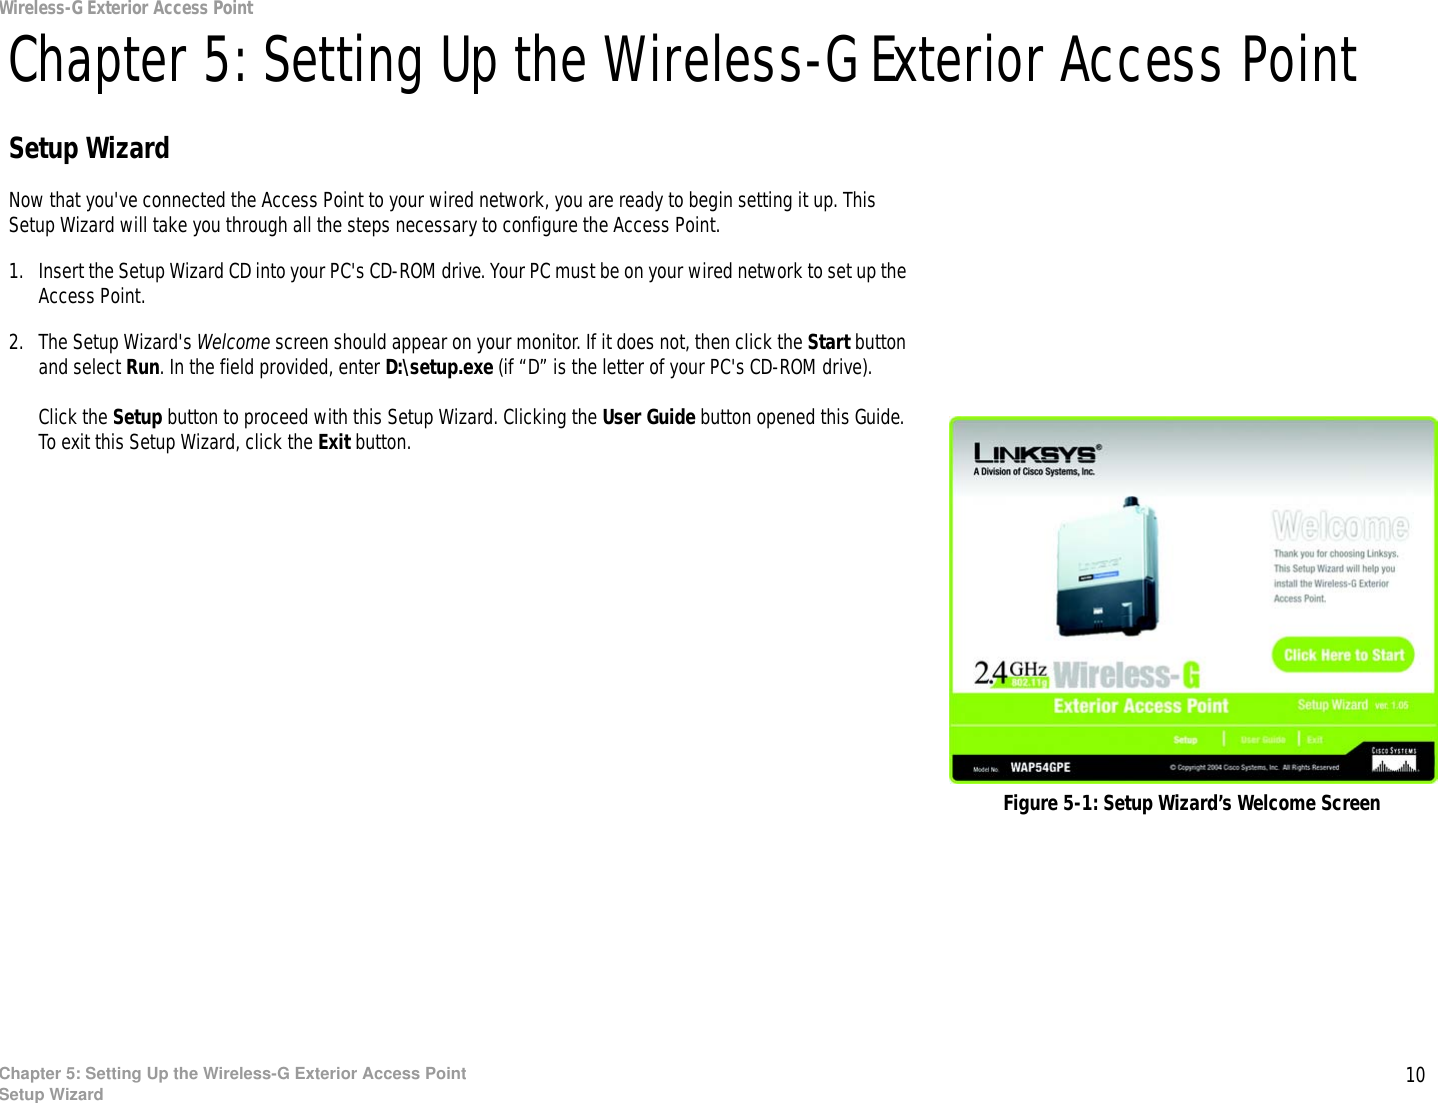 10Chapter 5: Setting Up the Wireless-G Exterior Access PointSetup WizardWireless-G Exterior Access PointChapter 5: Setting Up the Wireless-G Exterior Access PointSetup WizardNow that you&apos;ve connected the Access Point to your wired network, you are ready to begin setting it up. This Setup Wizard will take you through all the steps necessary to configure the Access Point.1. Insert the Setup Wizard CD into your PC&apos;s CD-ROM drive. Your PC must be on your wired network to set up the Access Point.2. The Setup Wizard&apos;s Welcome screen should appear on your monitor. If it does not, then click the Start button and select Run. In the field provided, enter D:\setup.exe (if “D” is the letter of your PC&apos;s CD-ROM drive). Click the Setup button to proceed with this Setup Wizard. Clicking the User Guide button opened this Guide. To exit this Setup Wizard, click the Exit button.Figure 5-1: Setup Wizard’s Welcome Screen